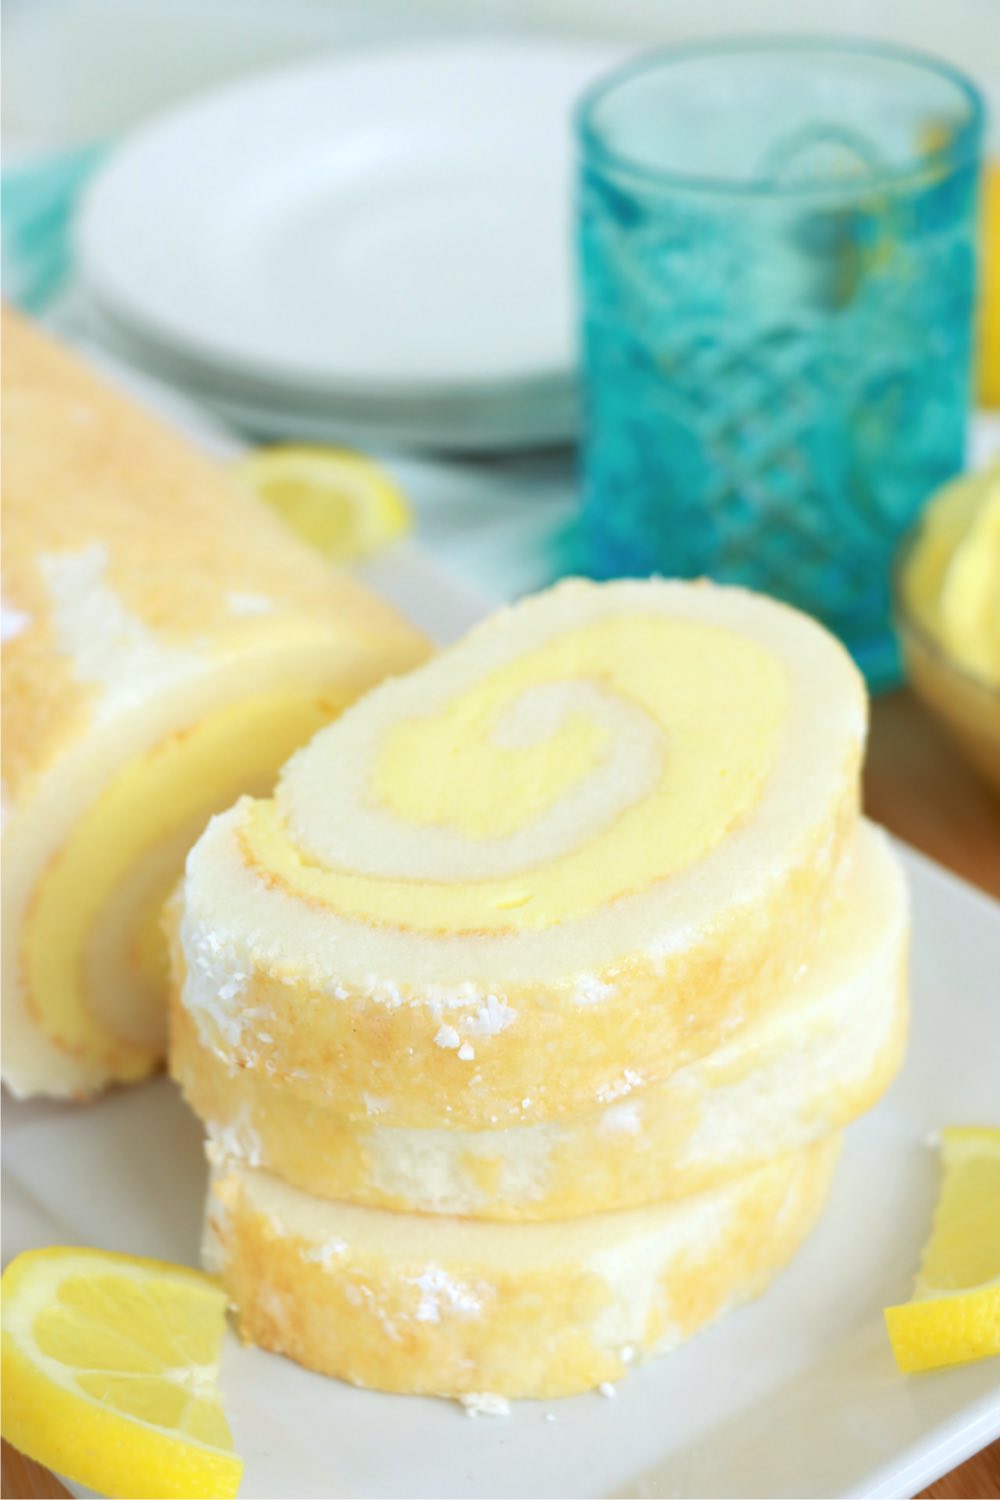 stack of cut cake roll pieces